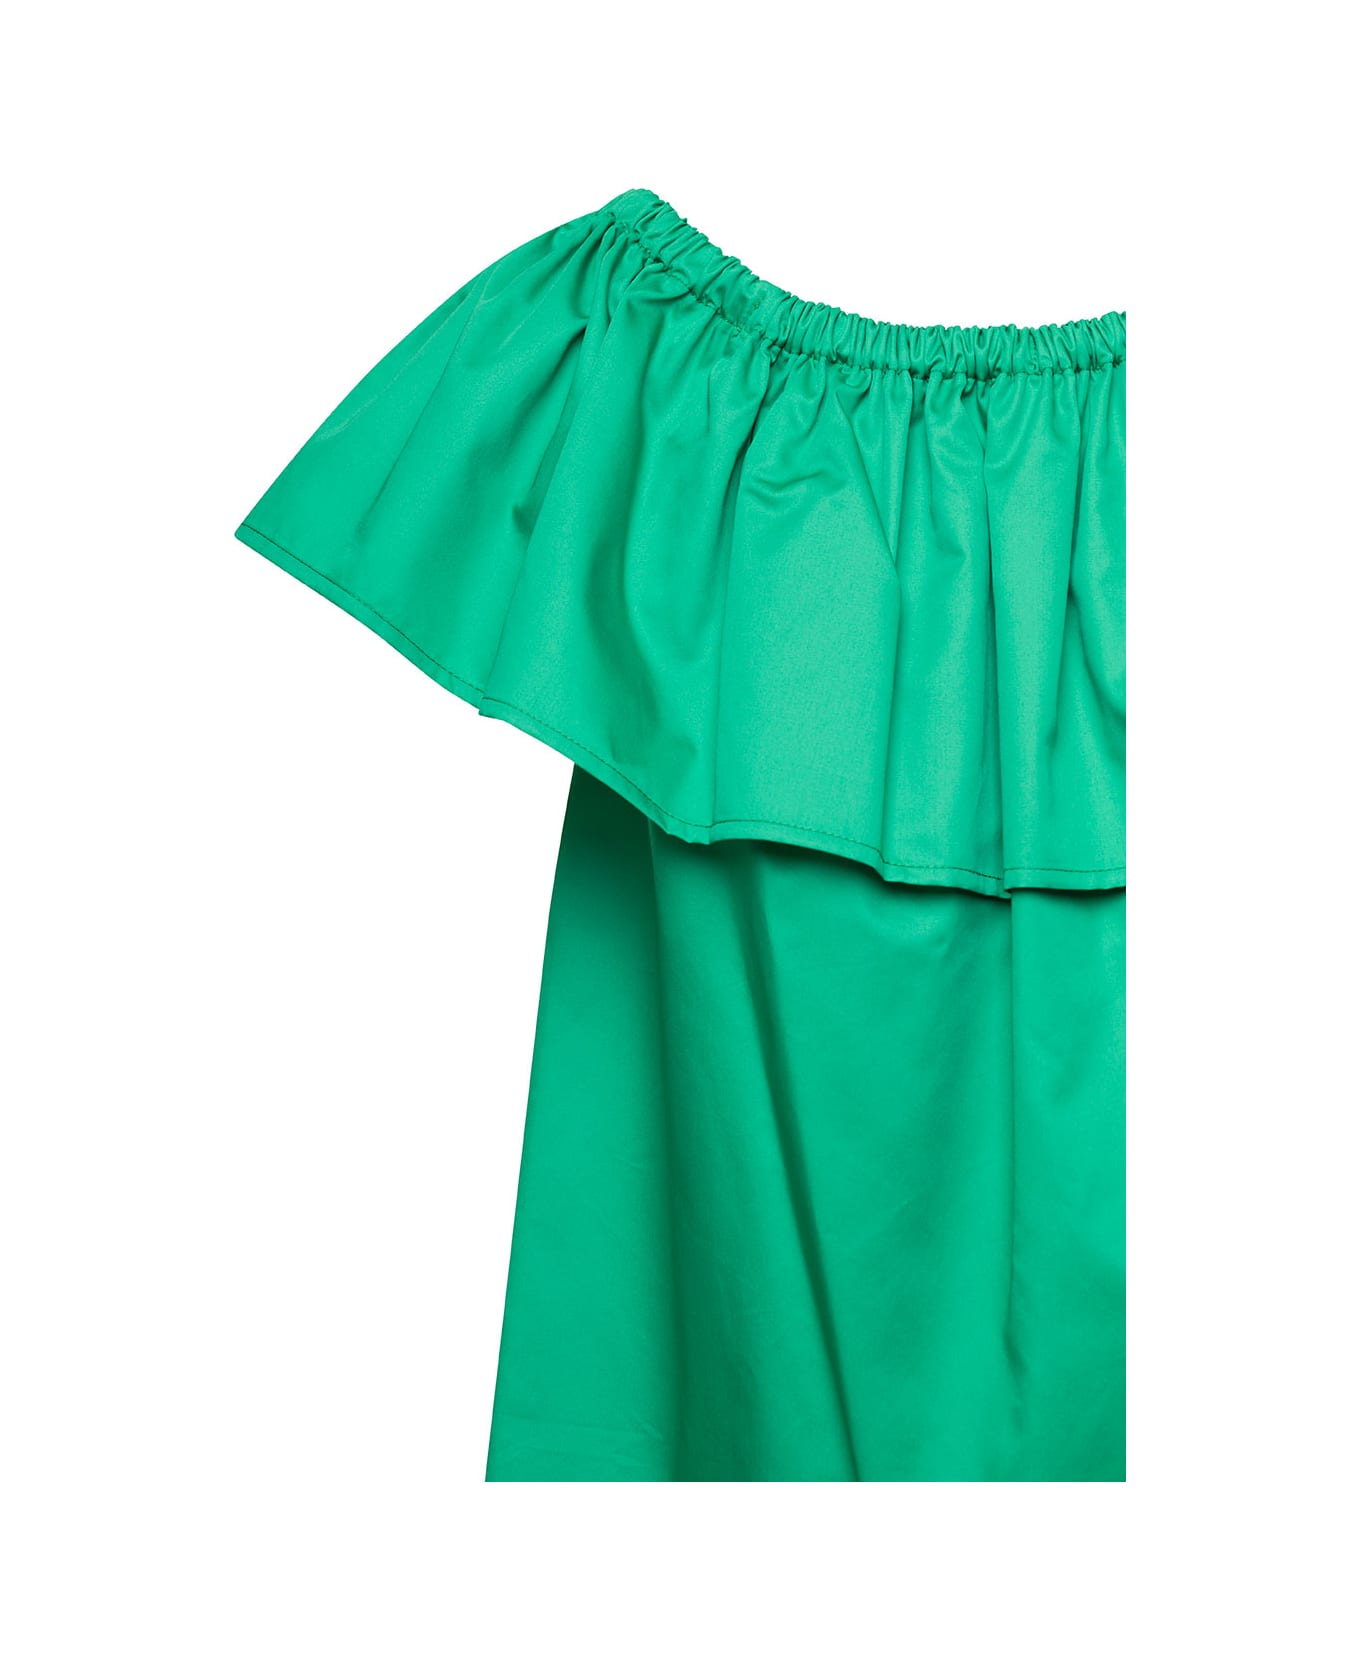 Douuod Emerald Green Ruffle Top With Boat Neckline In Cotton Woman - Green